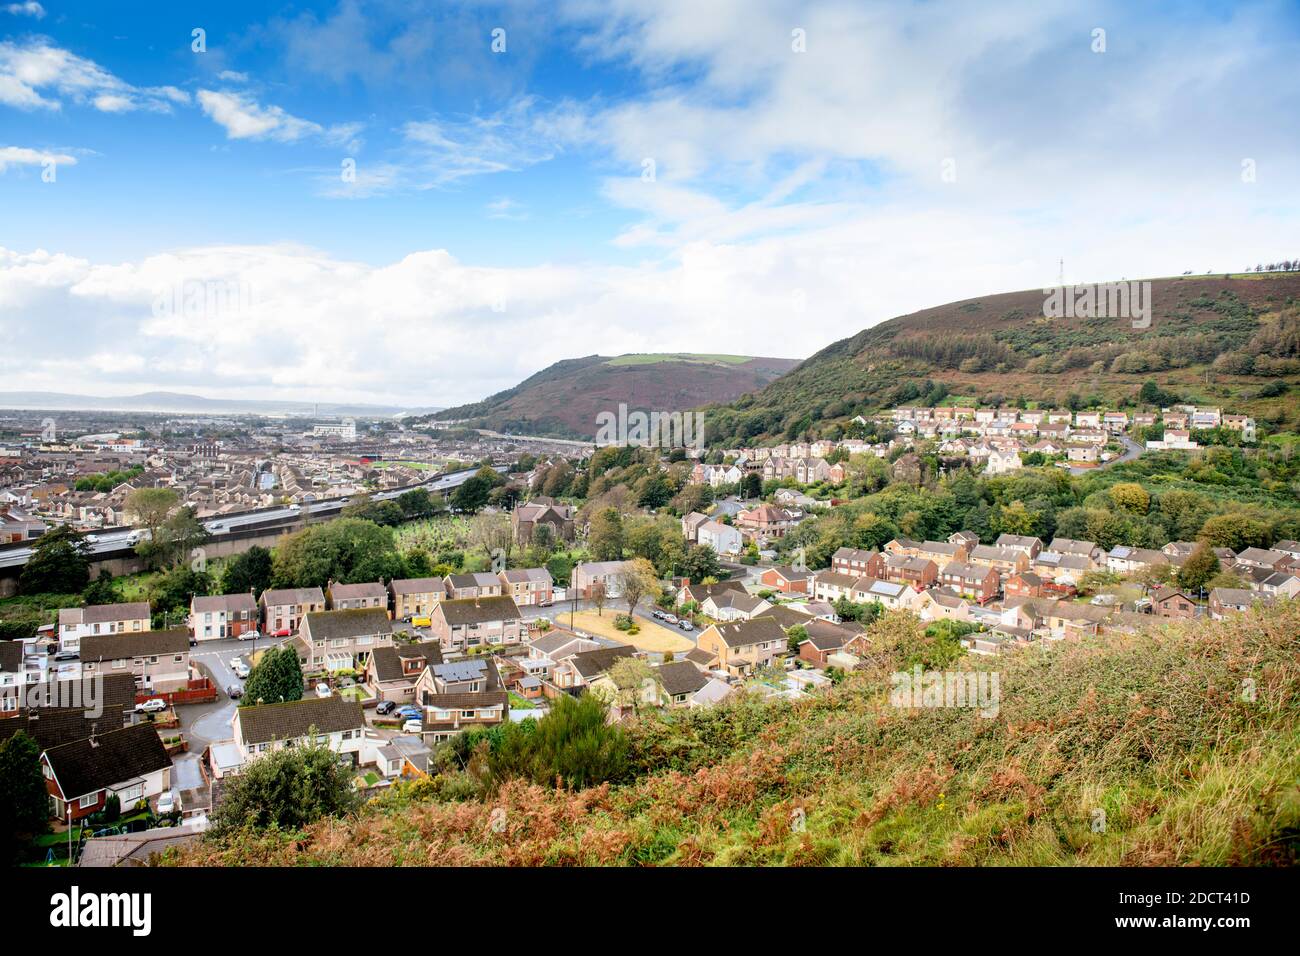 The Pennycae area of Port Talbot in South Wales UK Stock Photo